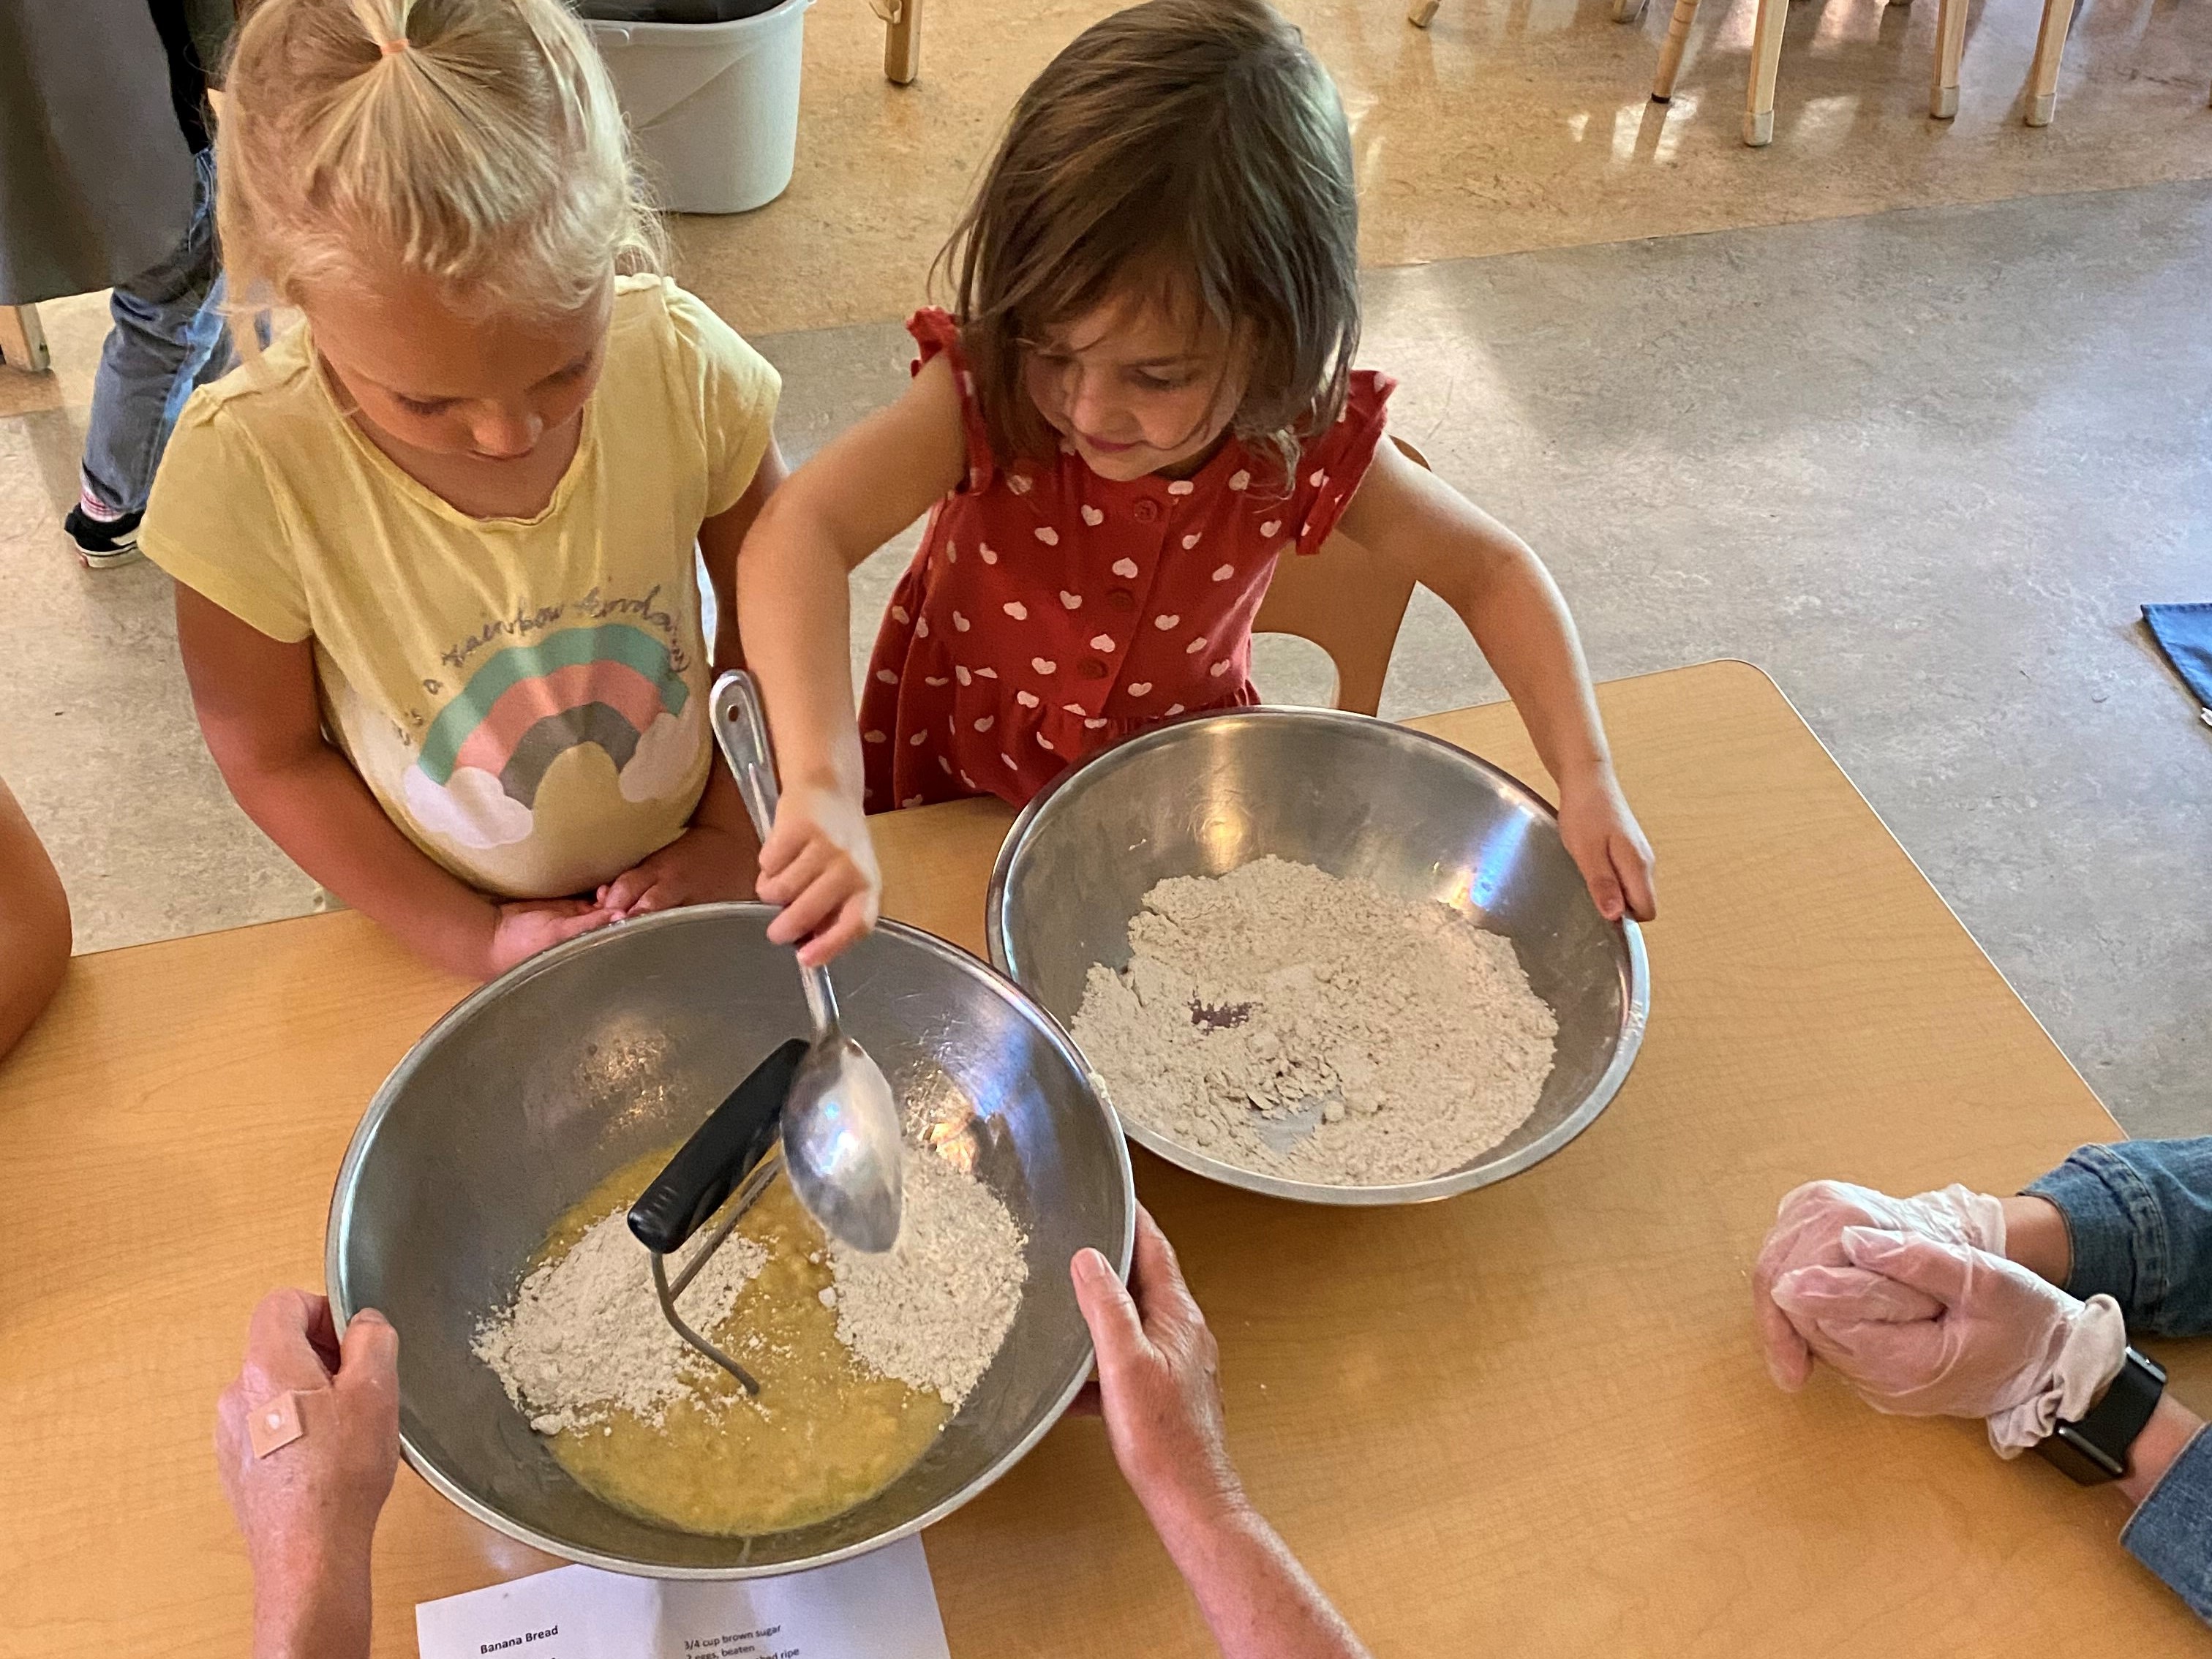 Children mixing ingredients in a bowl